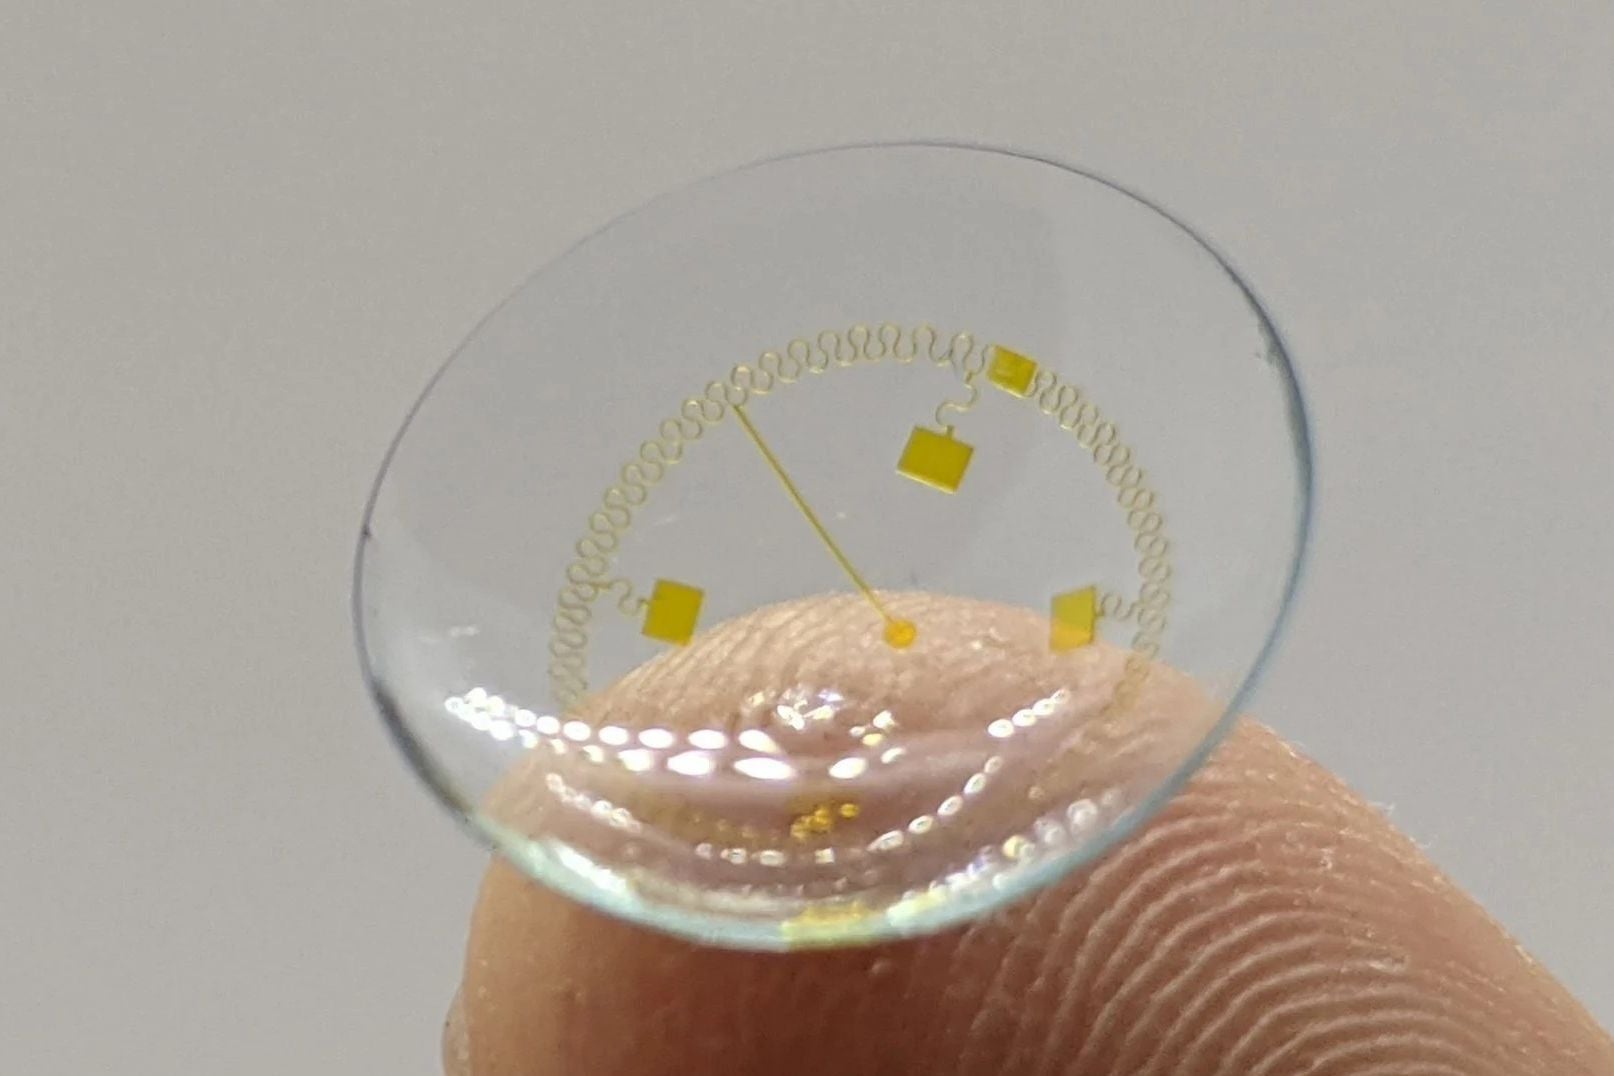 Smart contact lenses could arrive sooner than expected